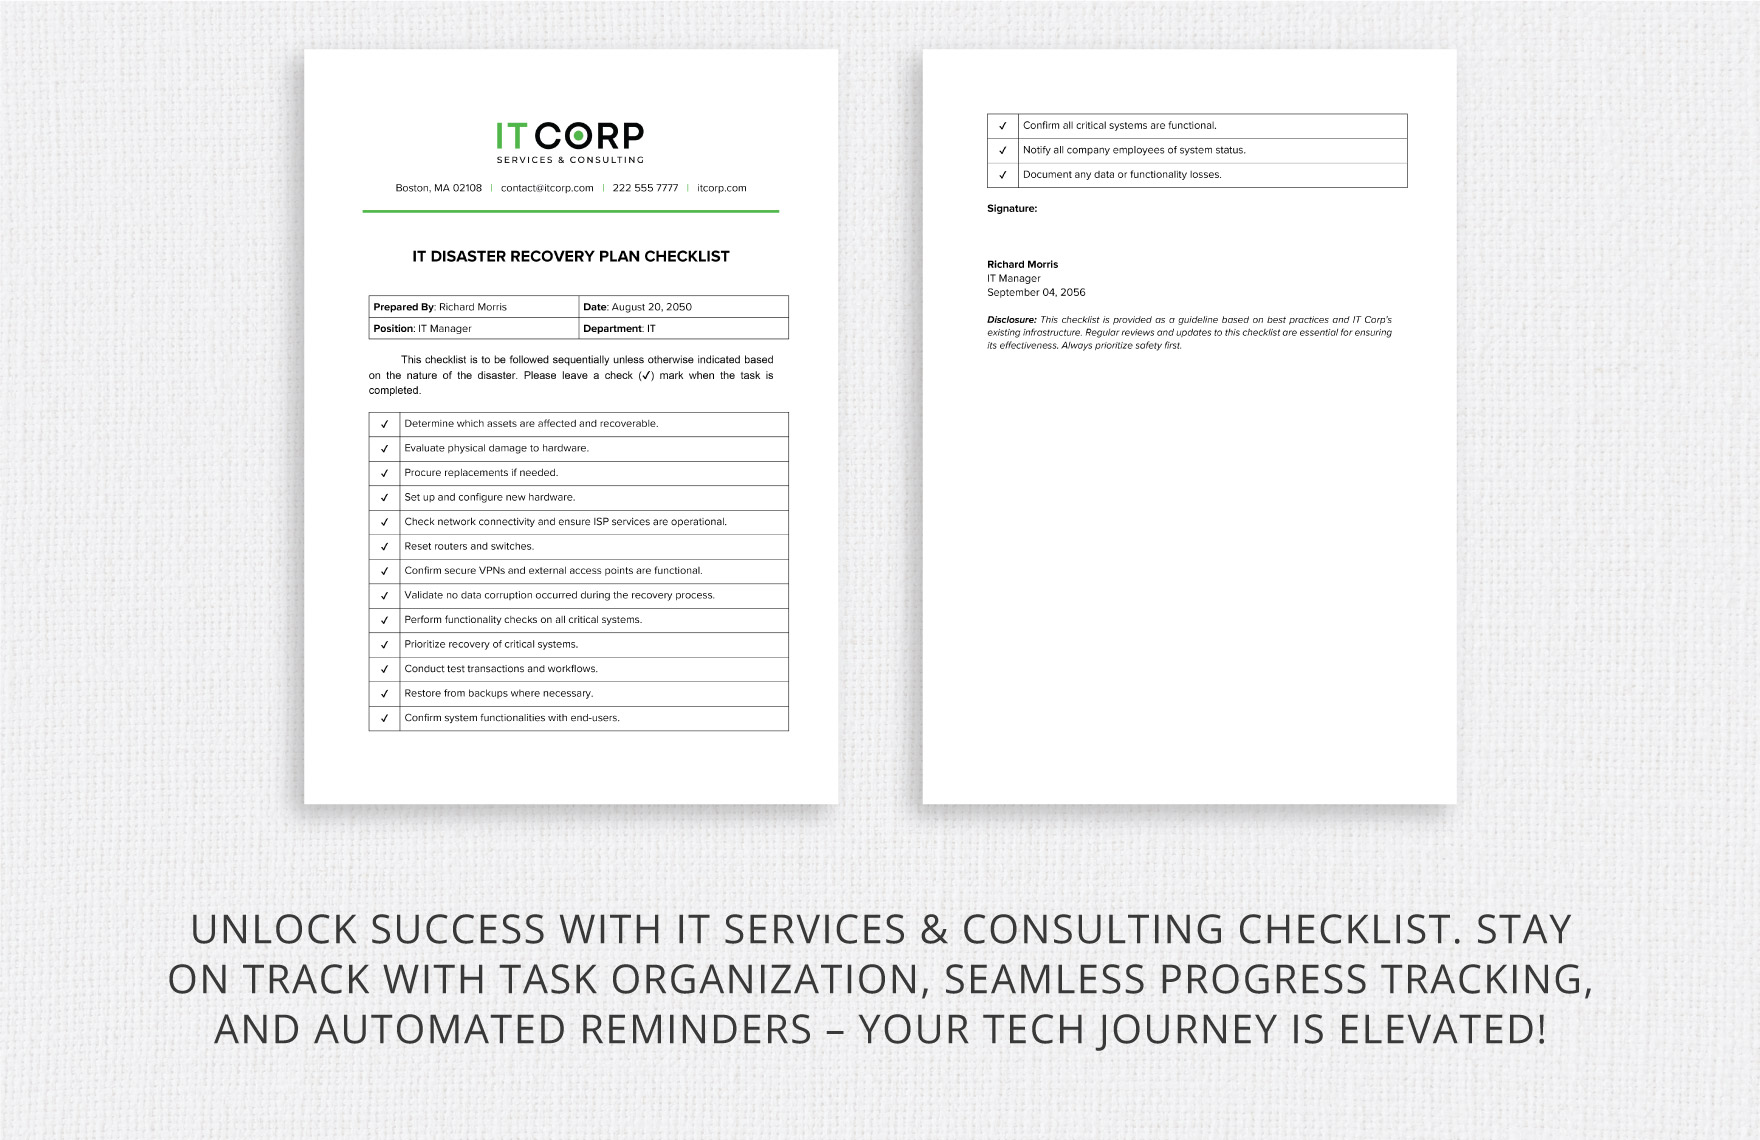 IT Disaster Recovery Plan Checklist Template